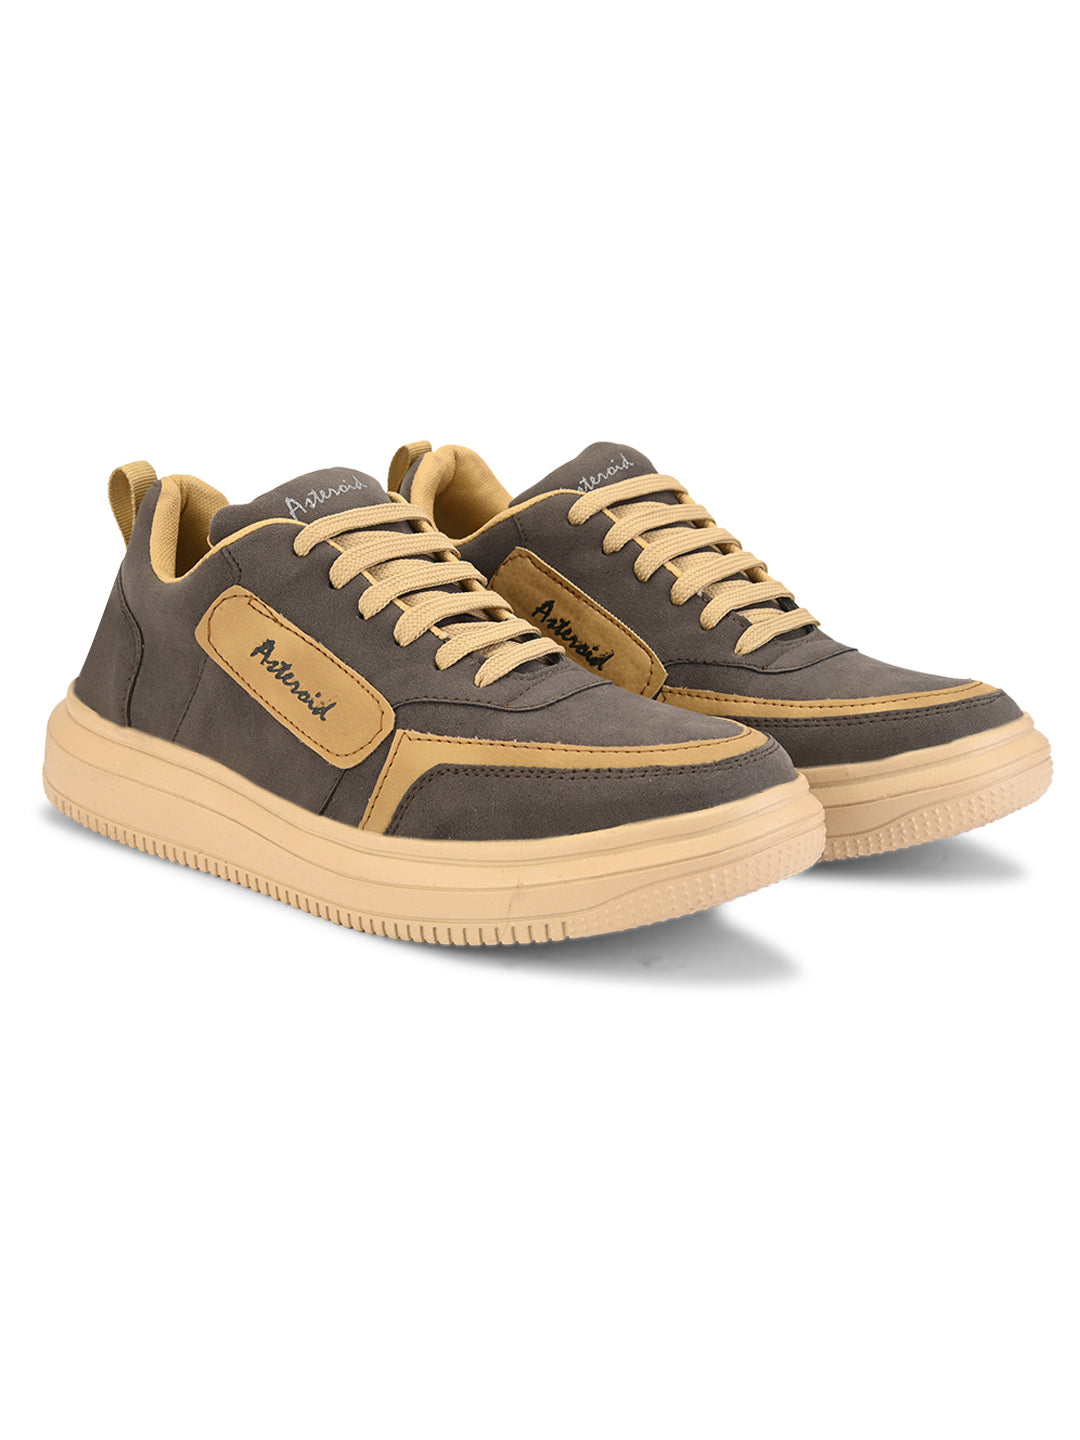 Suede Casual Sneakers. (195-GRY)